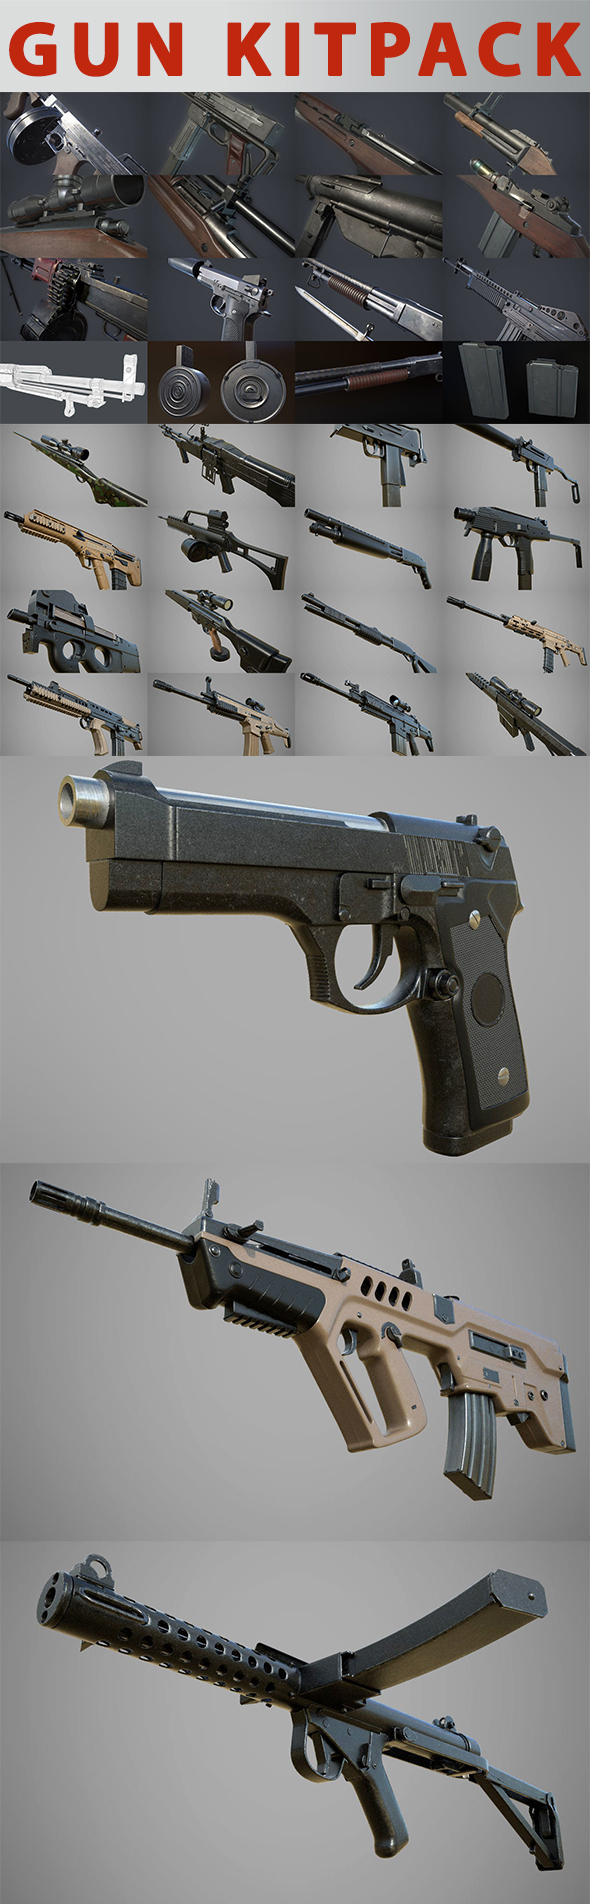 26x High-Poly Weapons - 3Docean 25457342